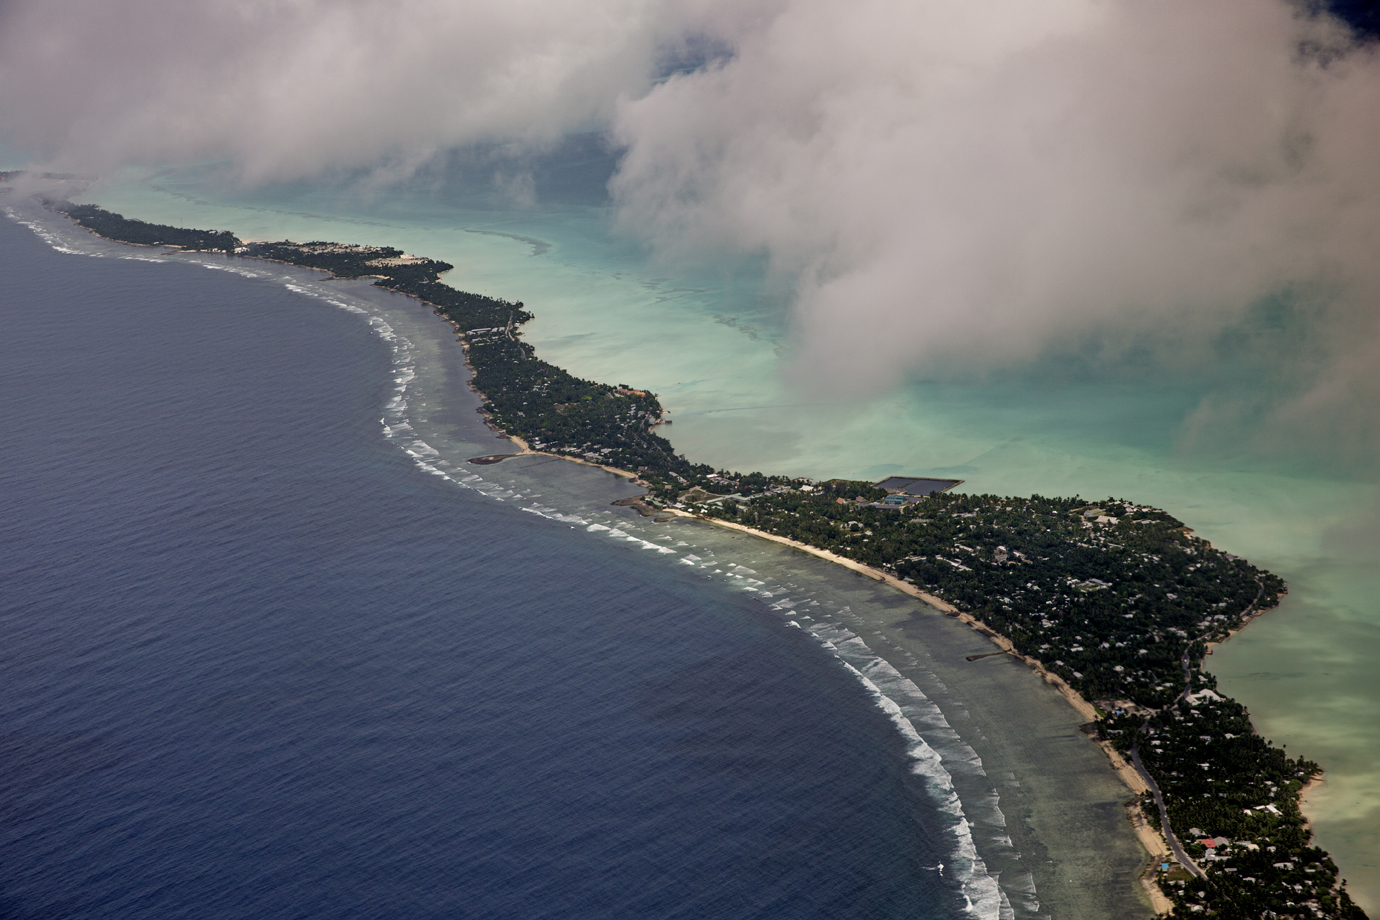  The island republic of Kiribati is the first nation to be expected to sink by elevated sea levels / Central Pacific - 2015 